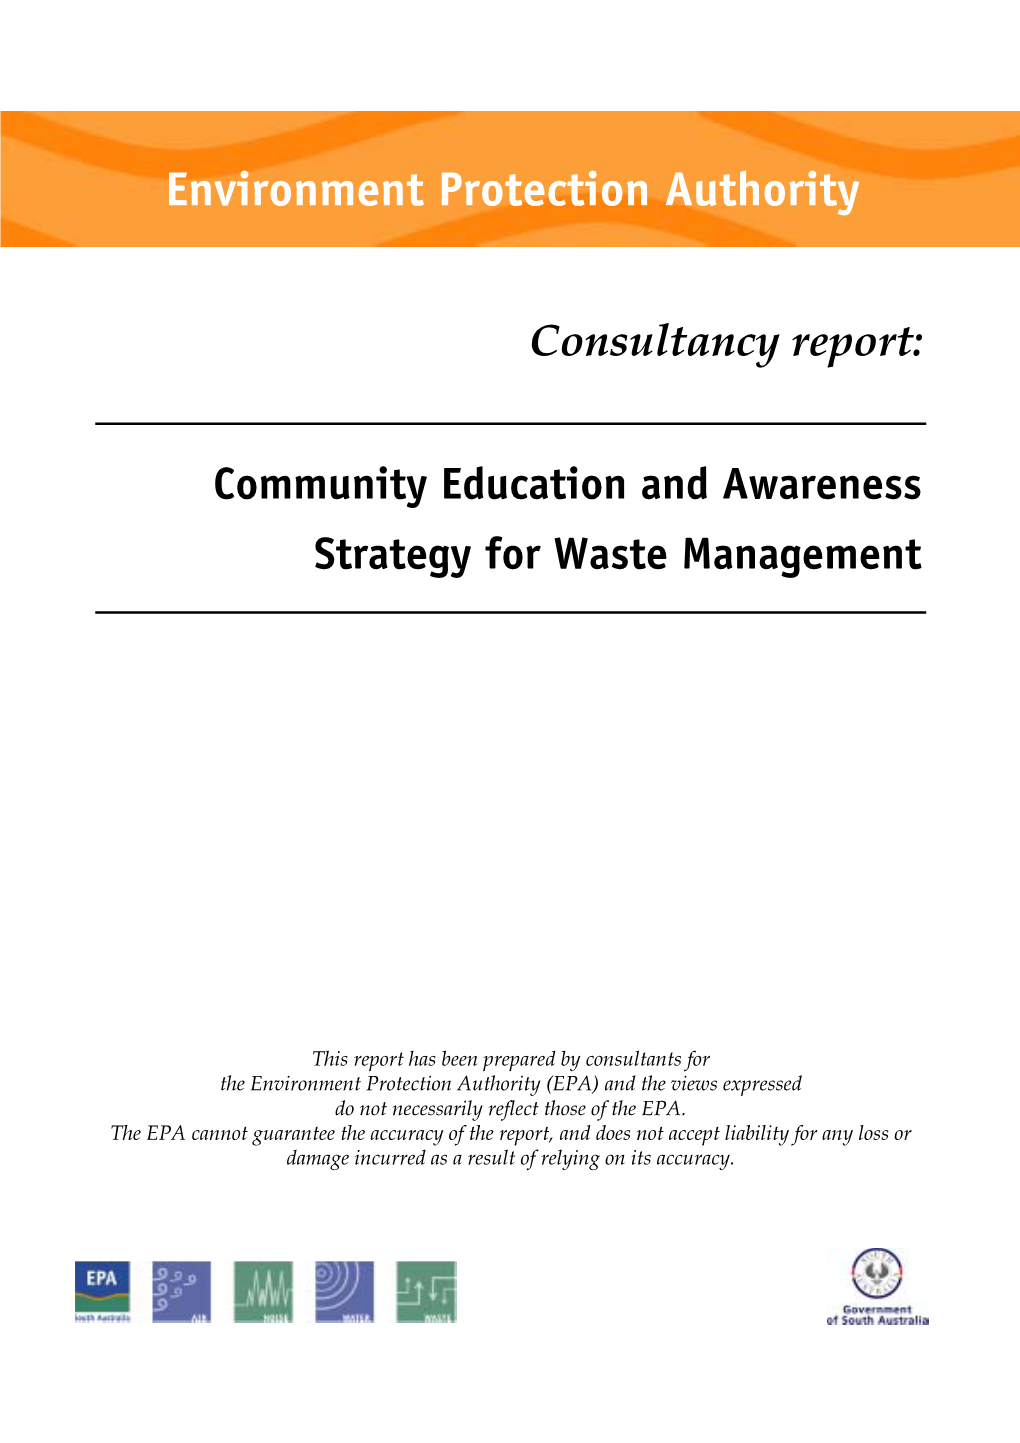 Community Education and Awareness Strategy for Waste Management